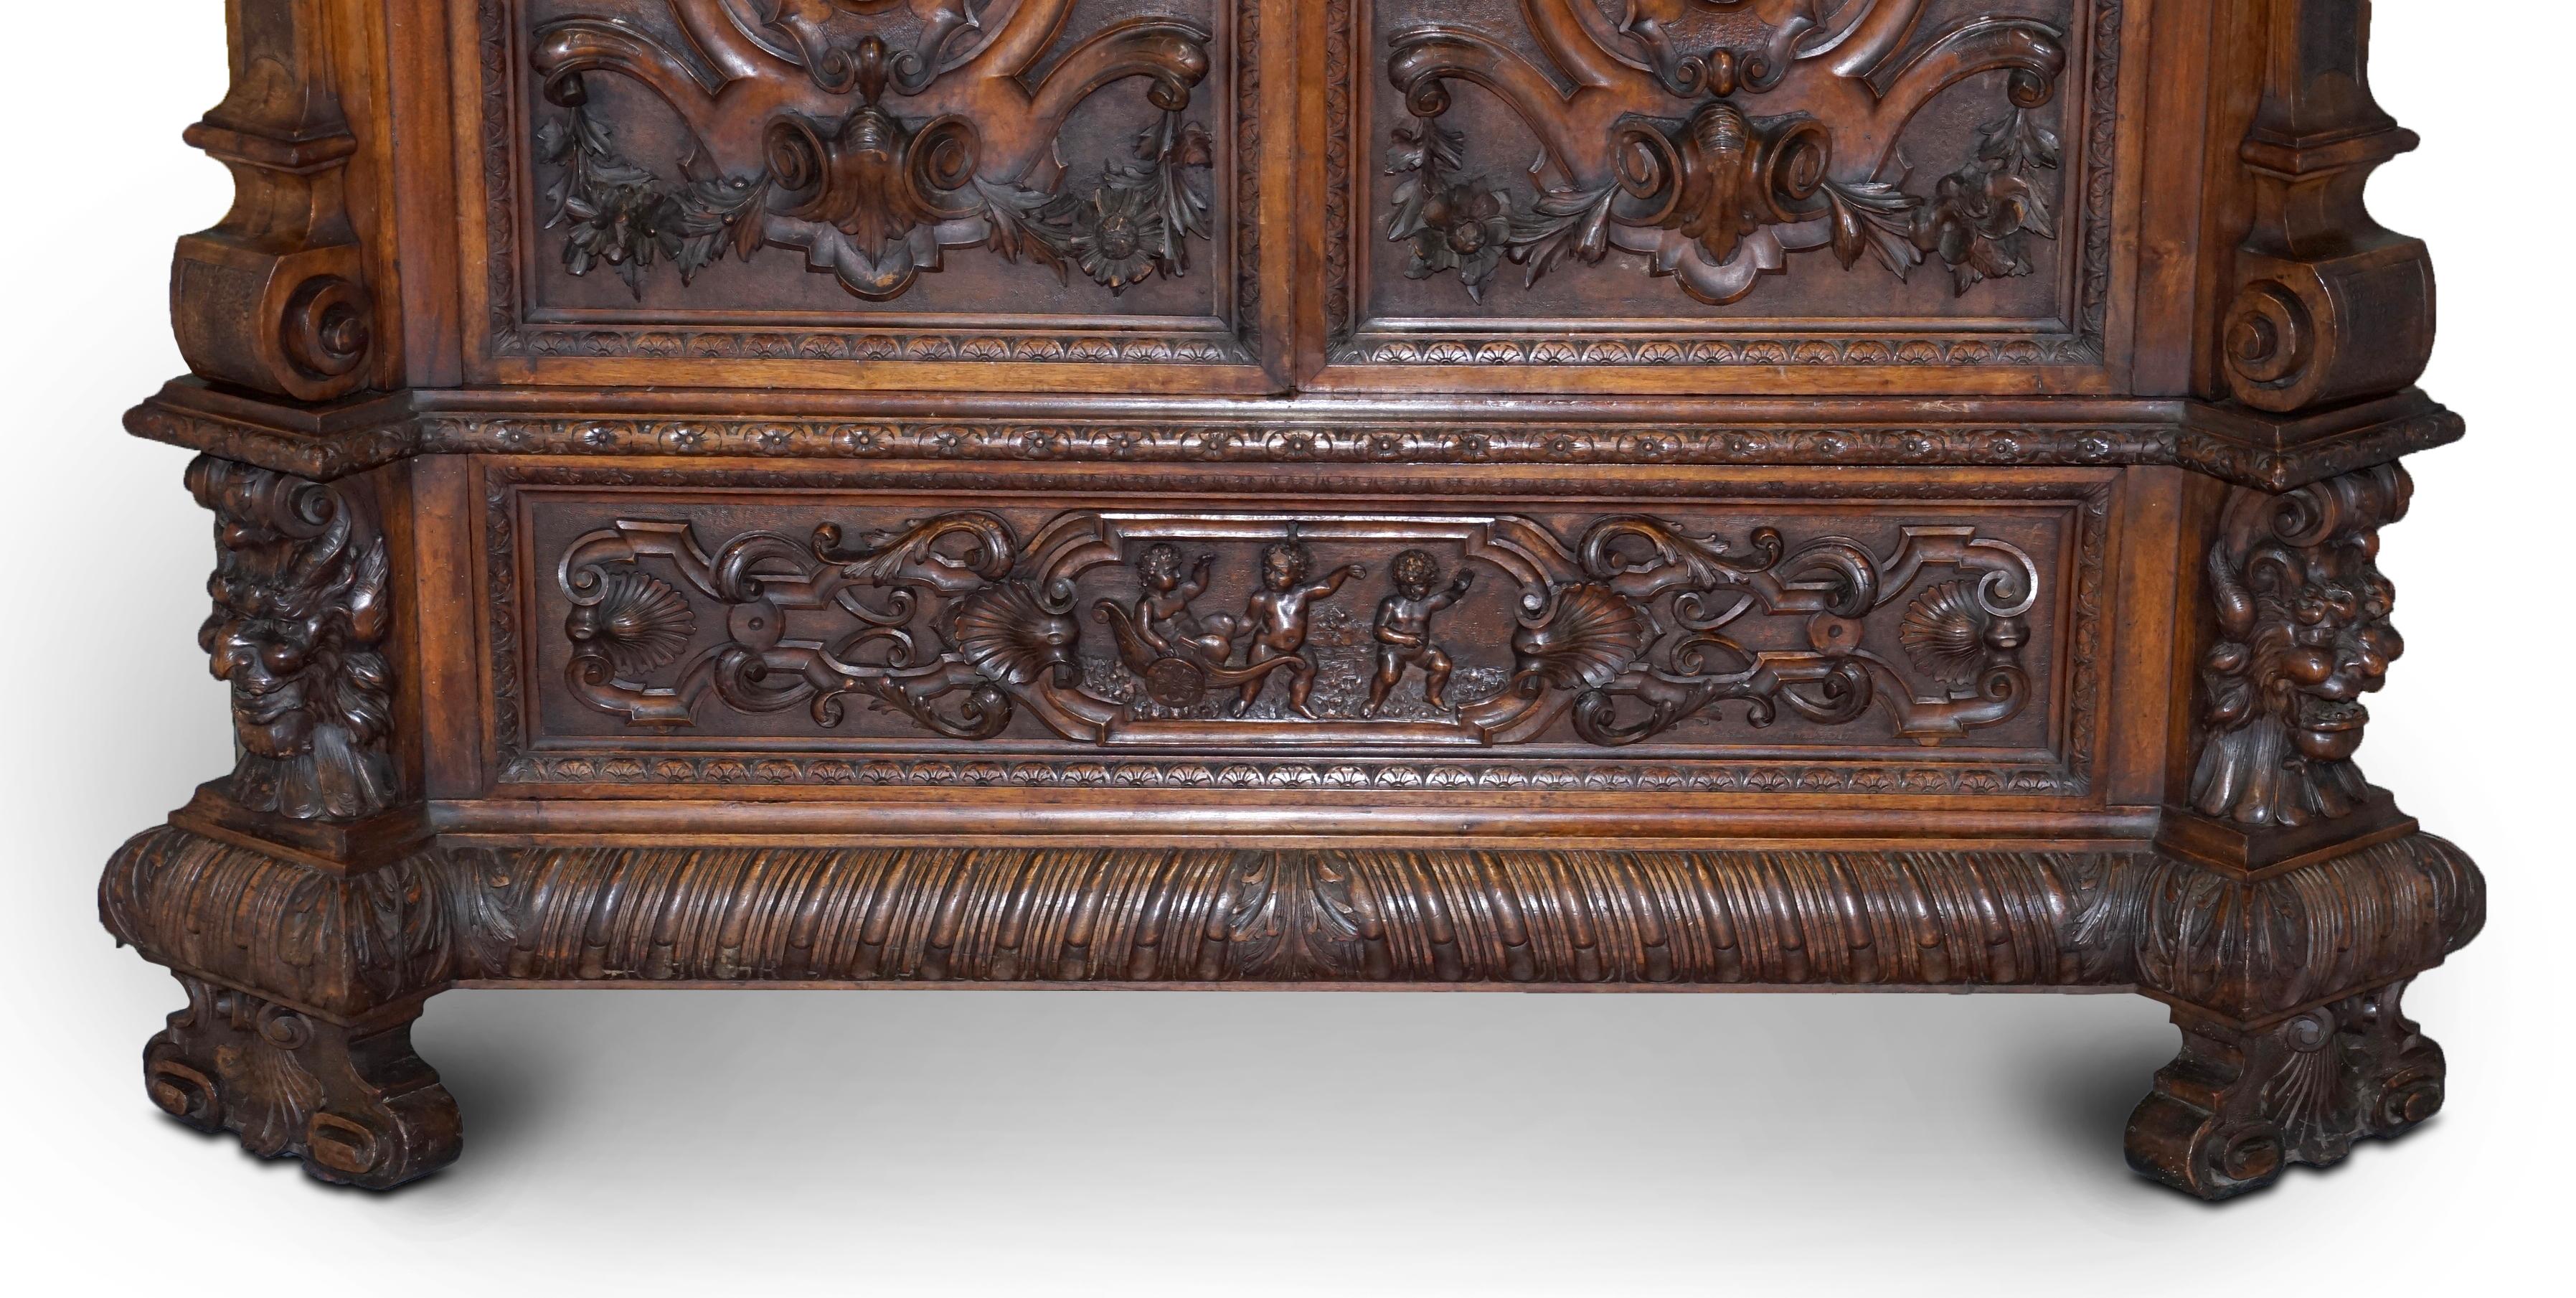 Hand-Crafted Rare Moses Michelangelo Guggenheim & Pauly Cie Et Venice Antique Carved Armoire For Sale